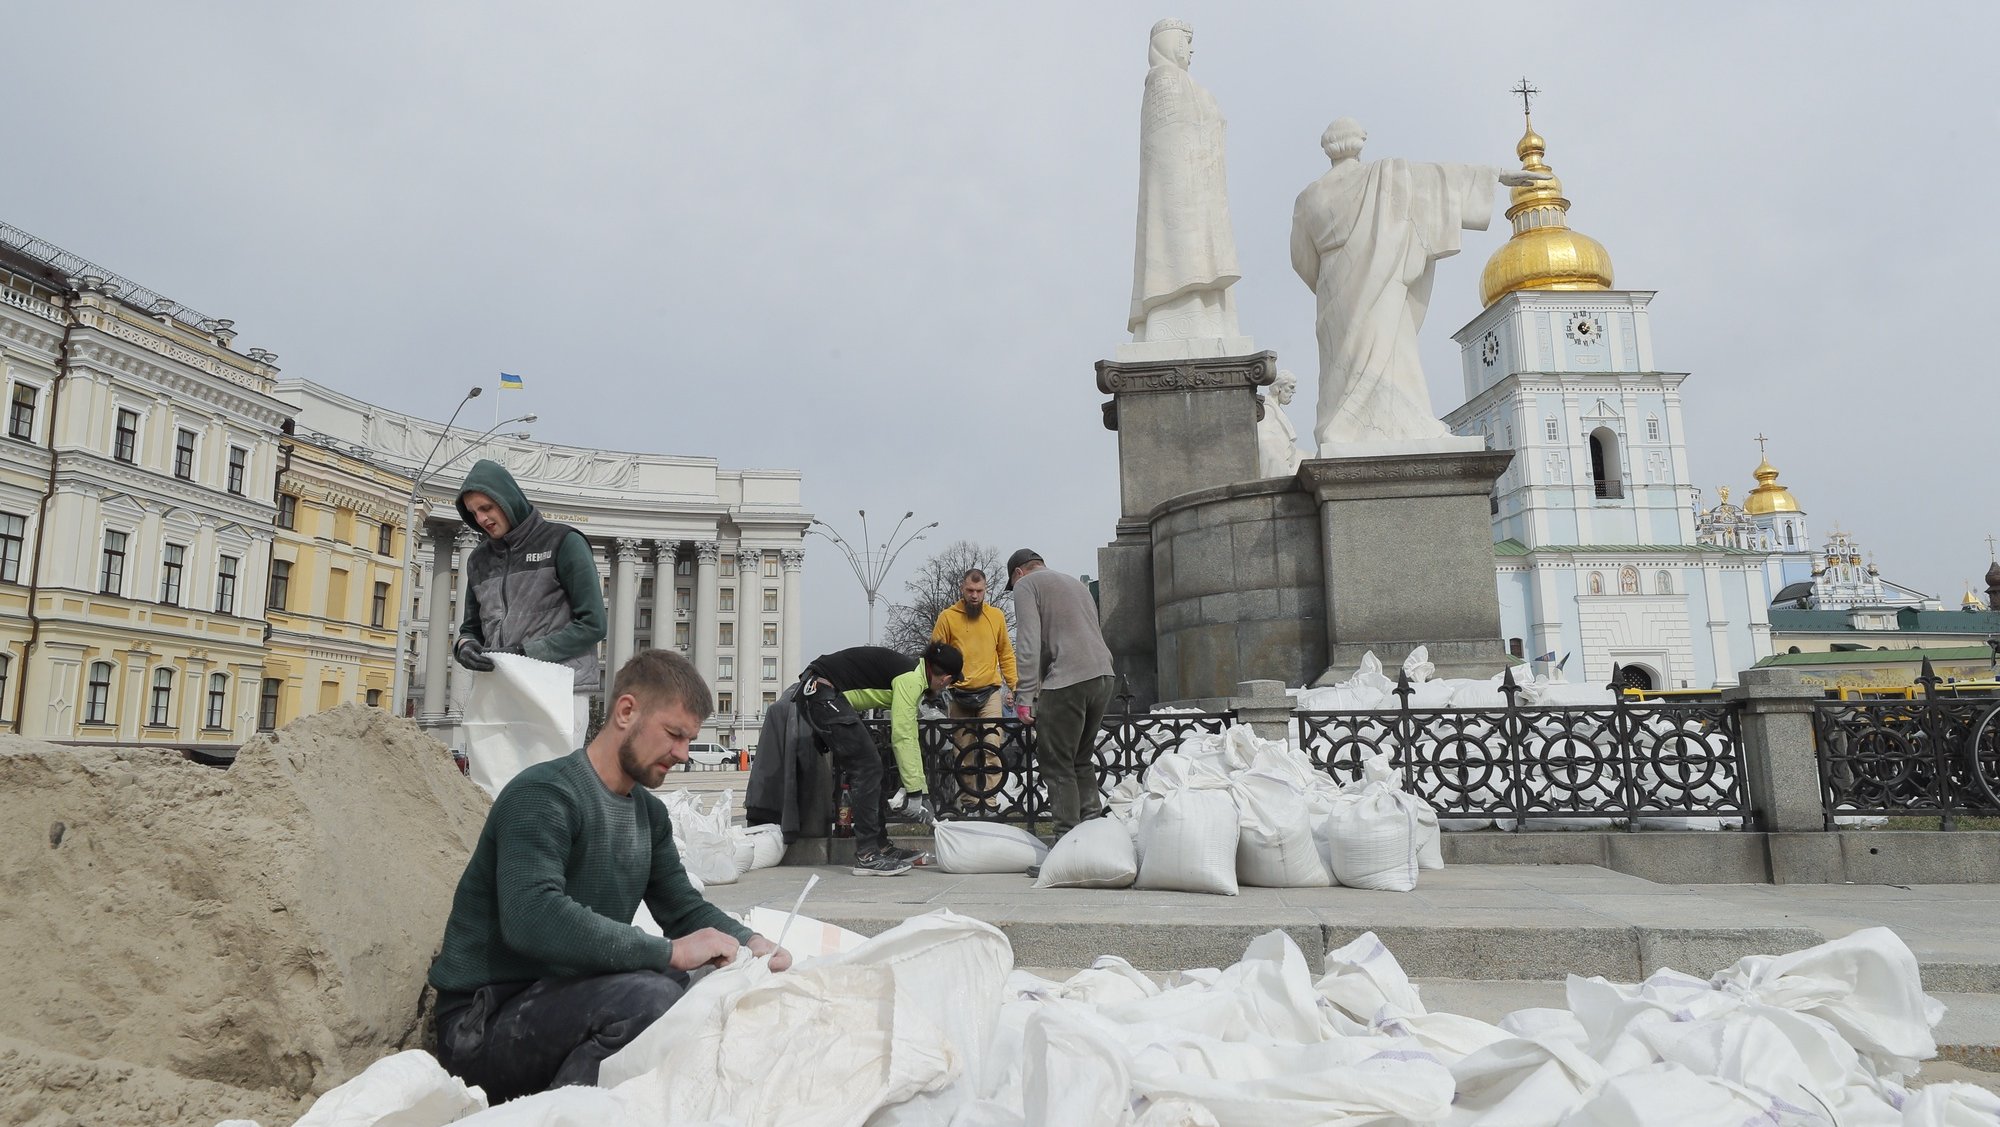 epa09851312 Volunteers cover with sandbags the monument of Princess Olga, Apostle Andrew, Cyril, and Methodius to protect it from Russian shelling, in the Ukrainian capital of Kyiv (Kiev), Ukraine, 26 March 2022. On 24 February, Russian troops had entered Ukrainian territory in what the Russian president declared a &#039;special military operation&#039;, resulting in fighting and destruction in the country, a huge flow of refugees, and multiple sanctions against Russia.  EPA/SERGEY DOLZHENKO